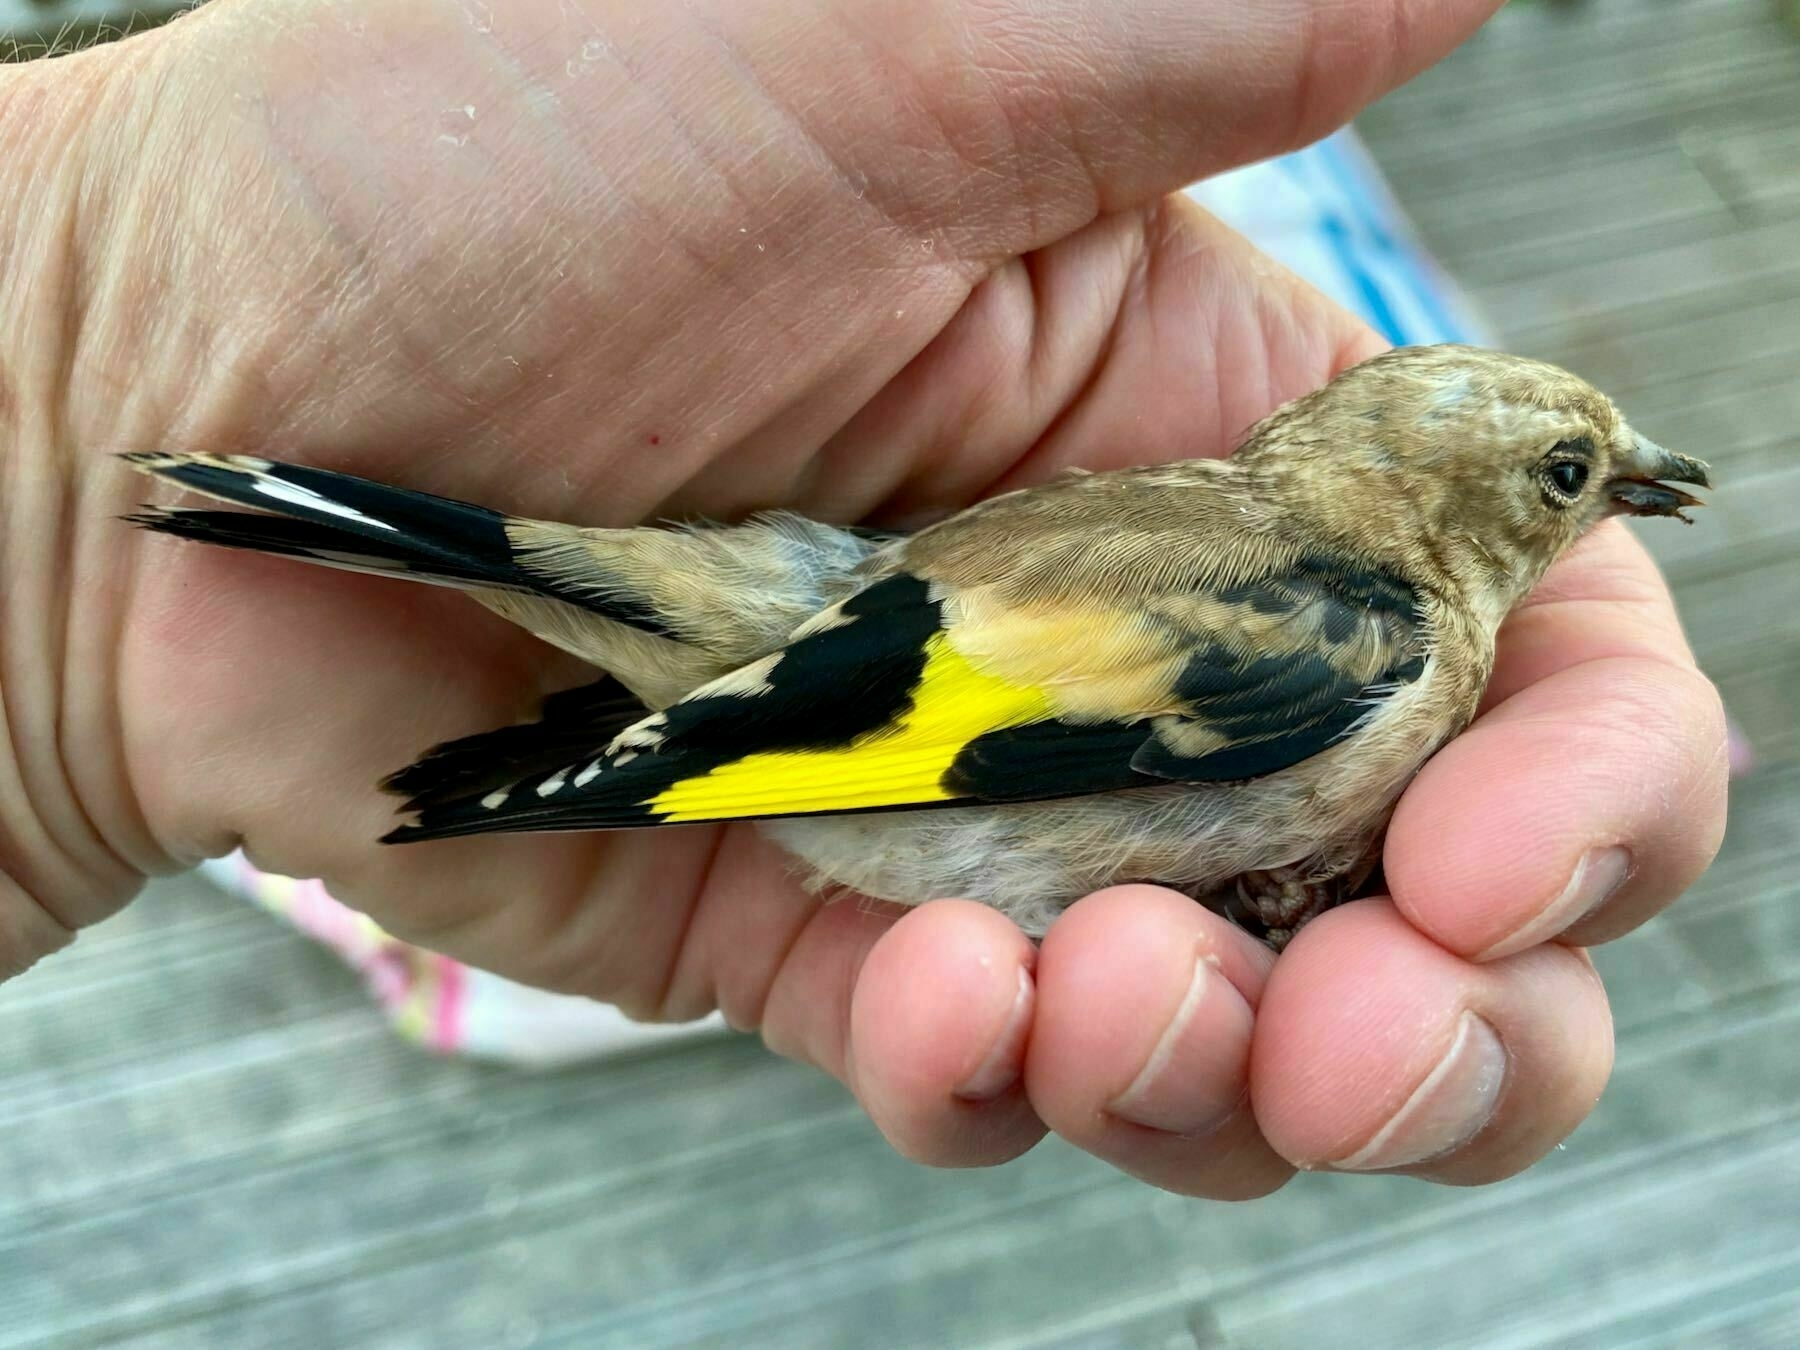 SMall bird with bright yellow wing bar in palm of hand. 